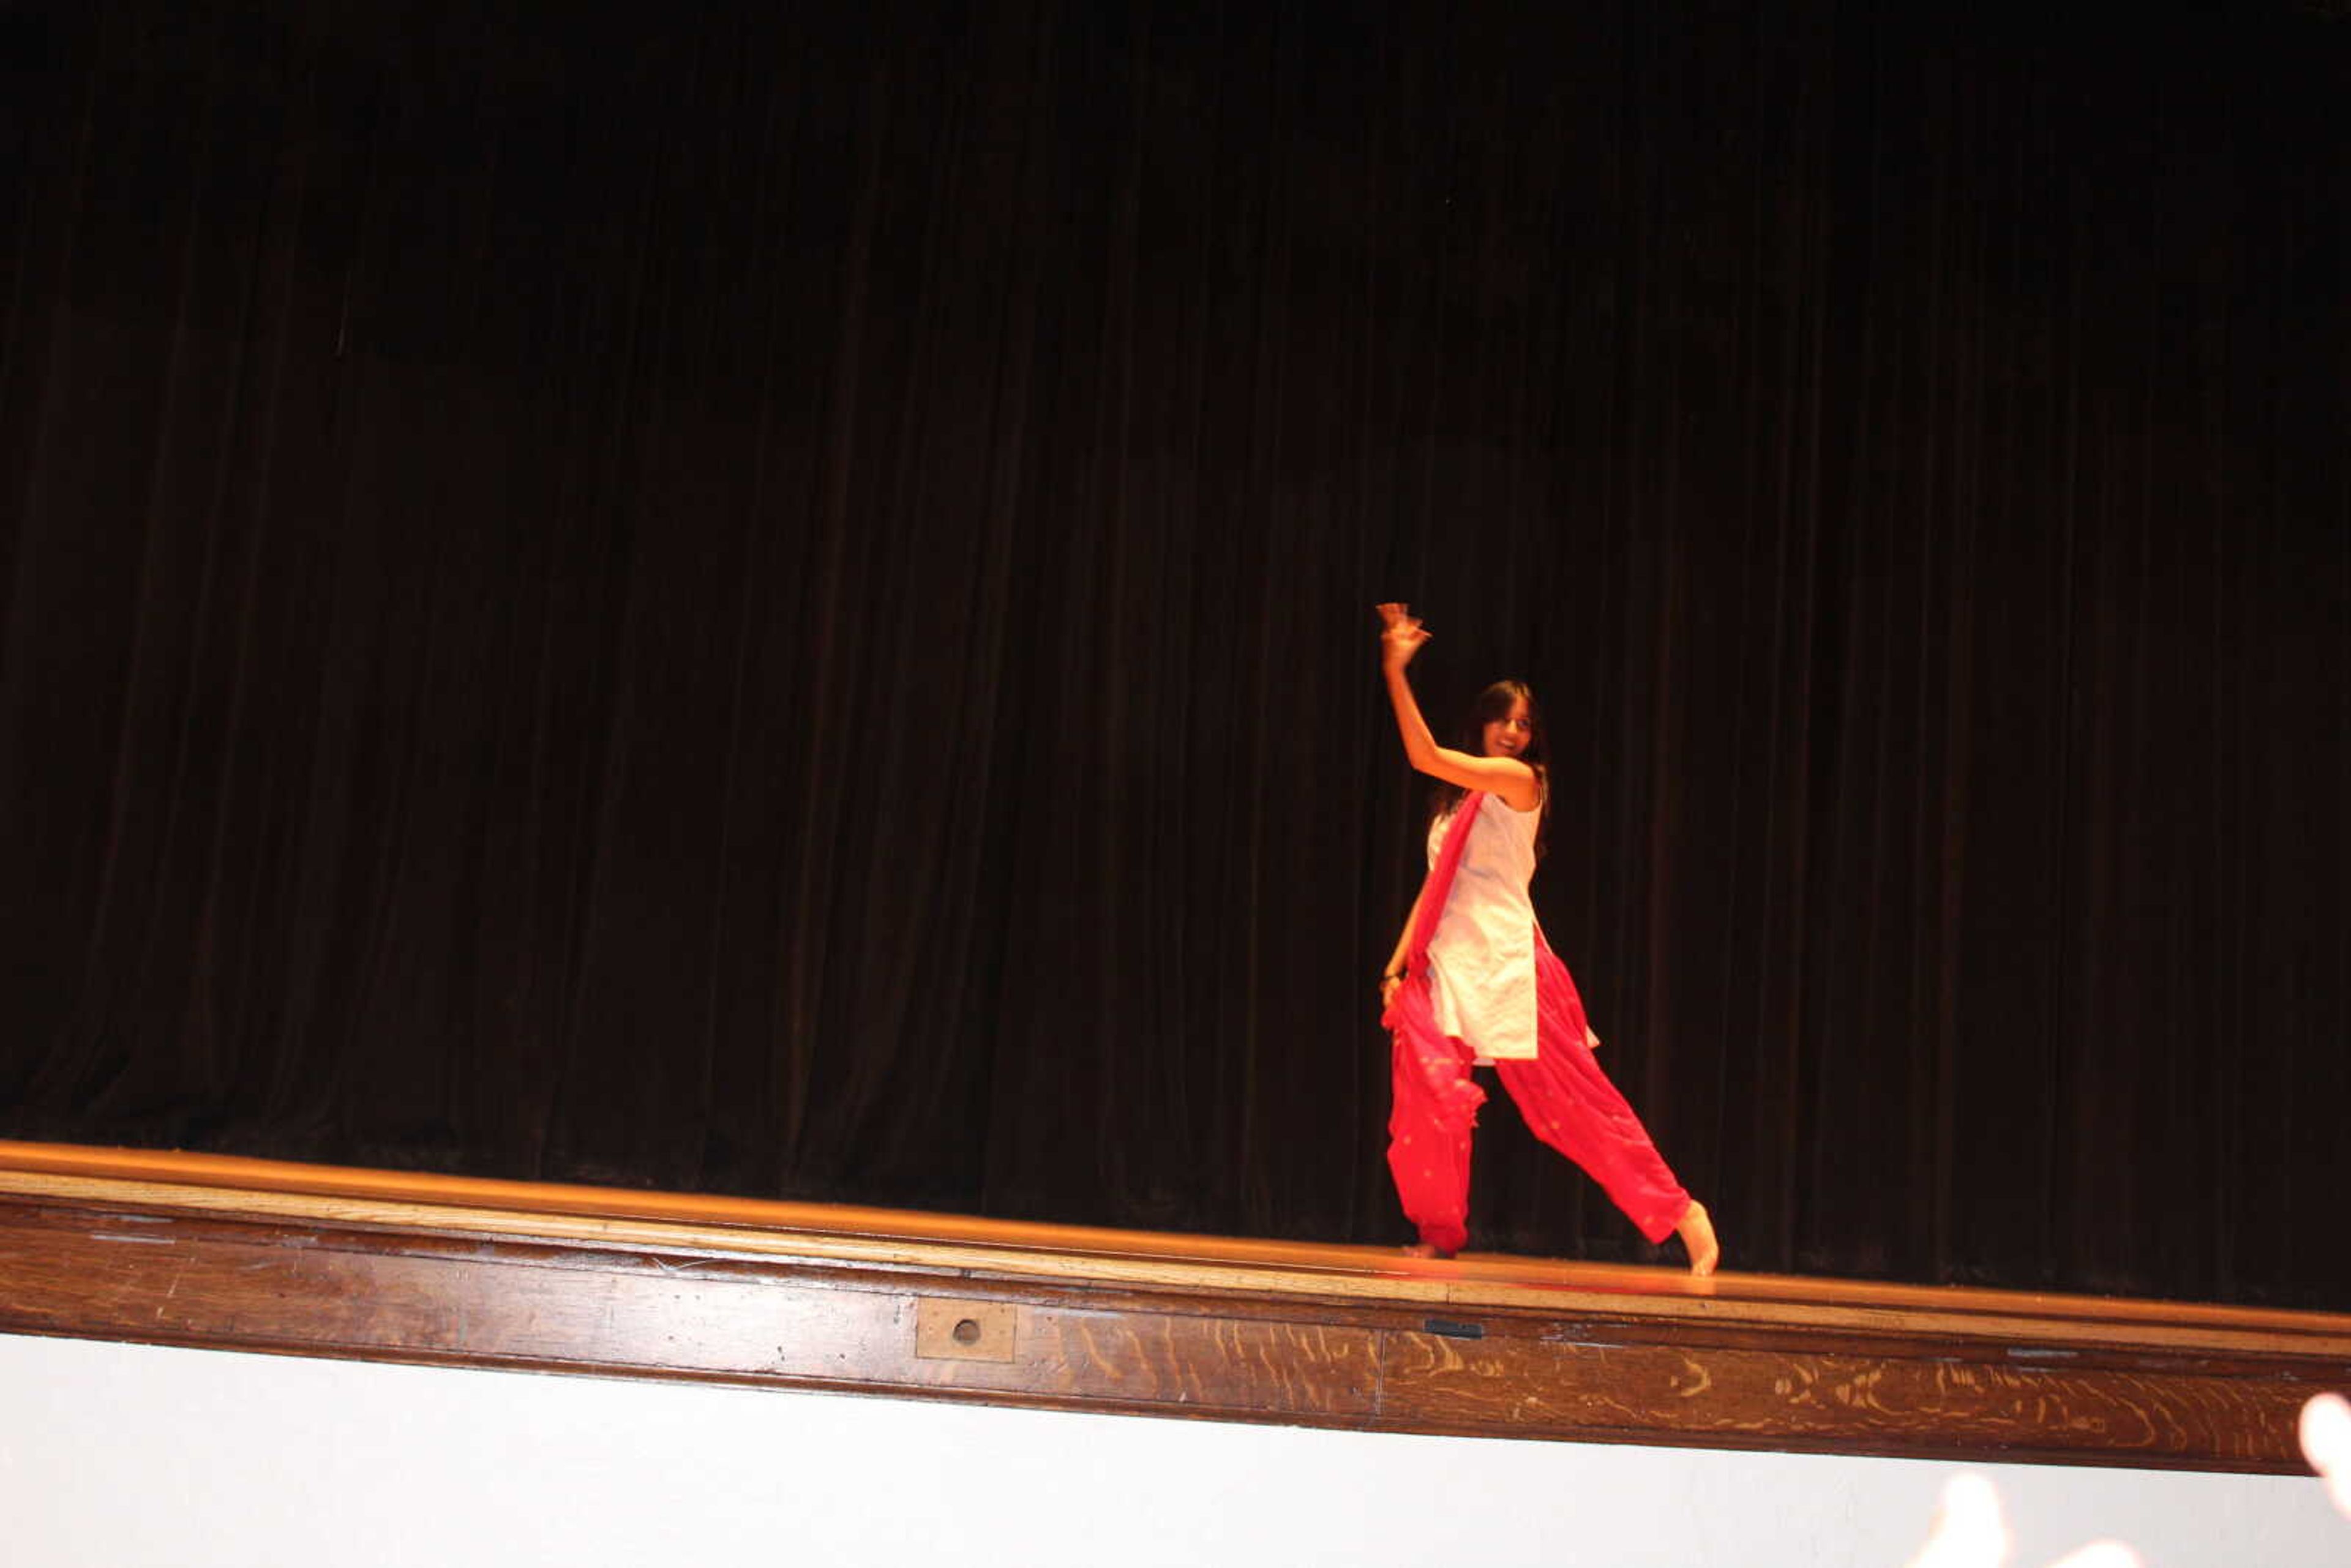 Mannat Varshney performed a traditional Bollywood routine at the Homecoming Planning Committee's annual talent show at 7 p.m. on Nov. 2 in the Academic Hall auditorium.